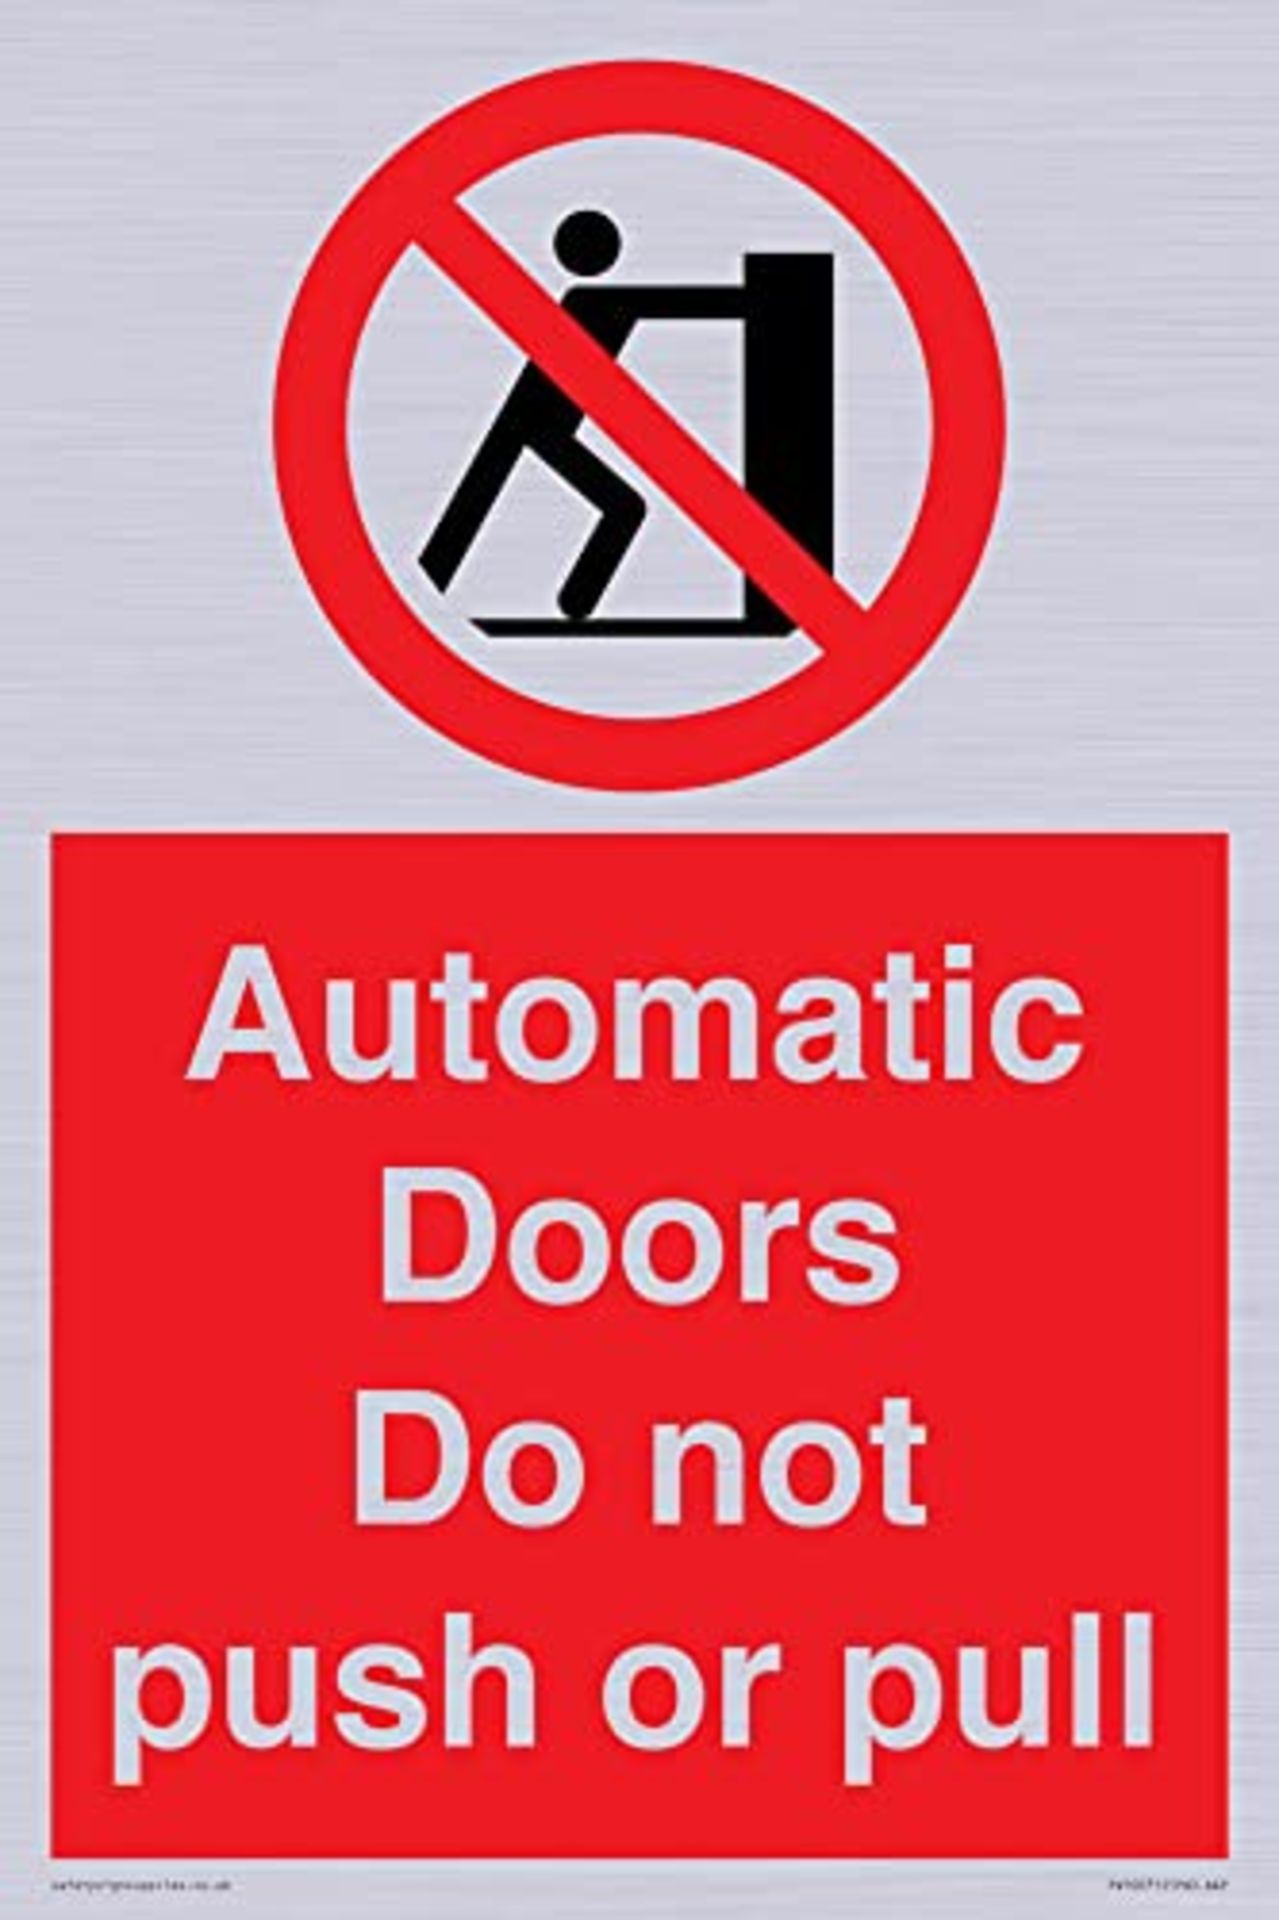 Automatic Doors Do not push or pull Sign - 200x300mm - A4P